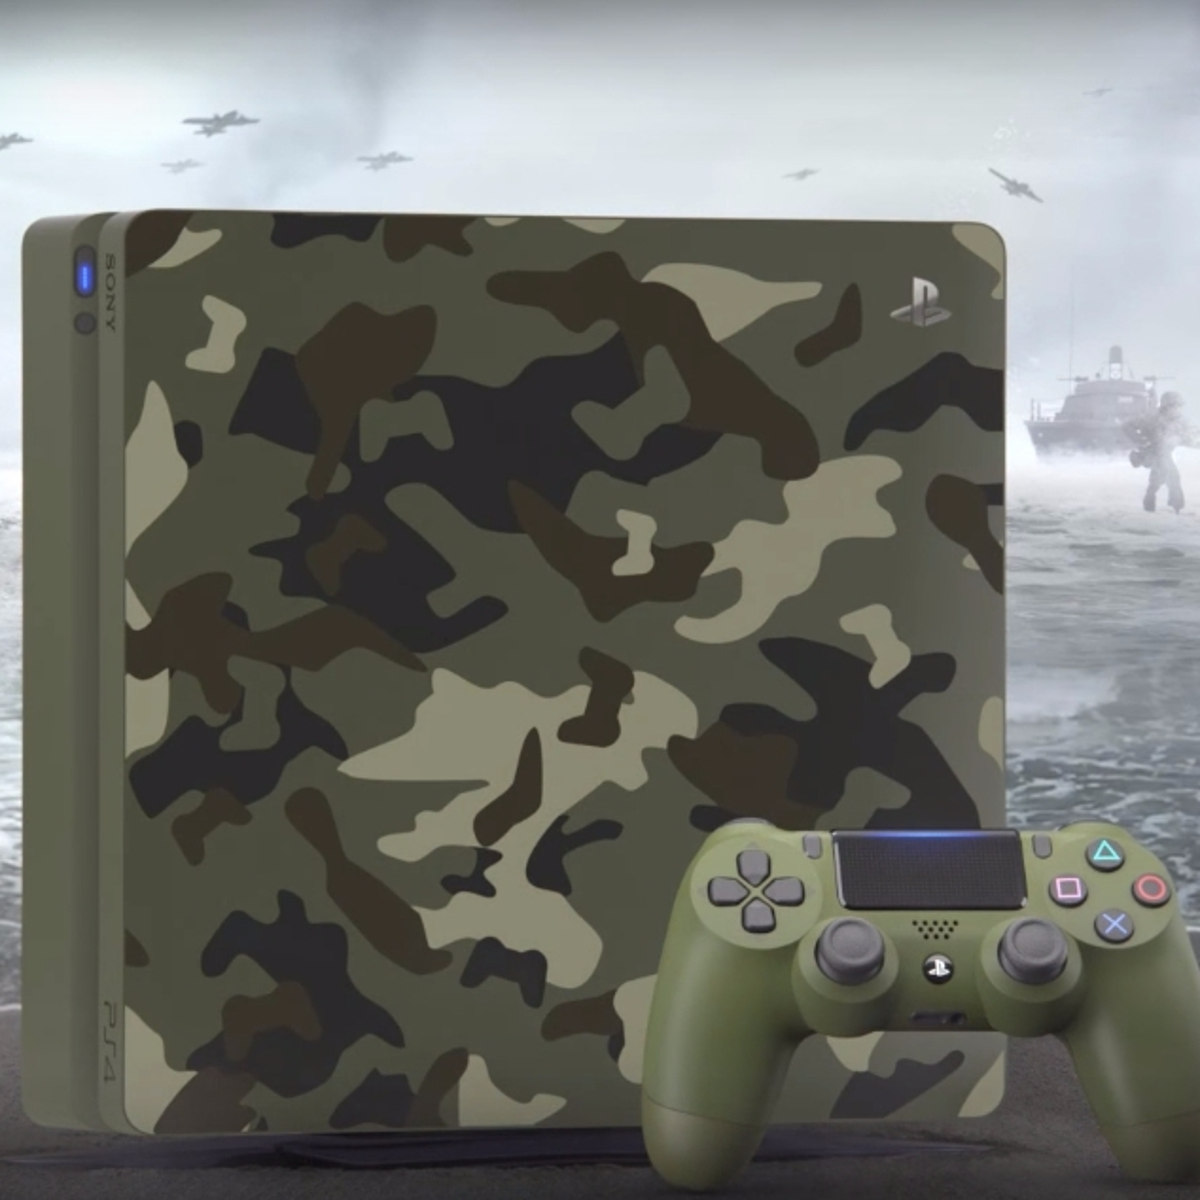 There's an ugly Call of Duty PlayStation 4